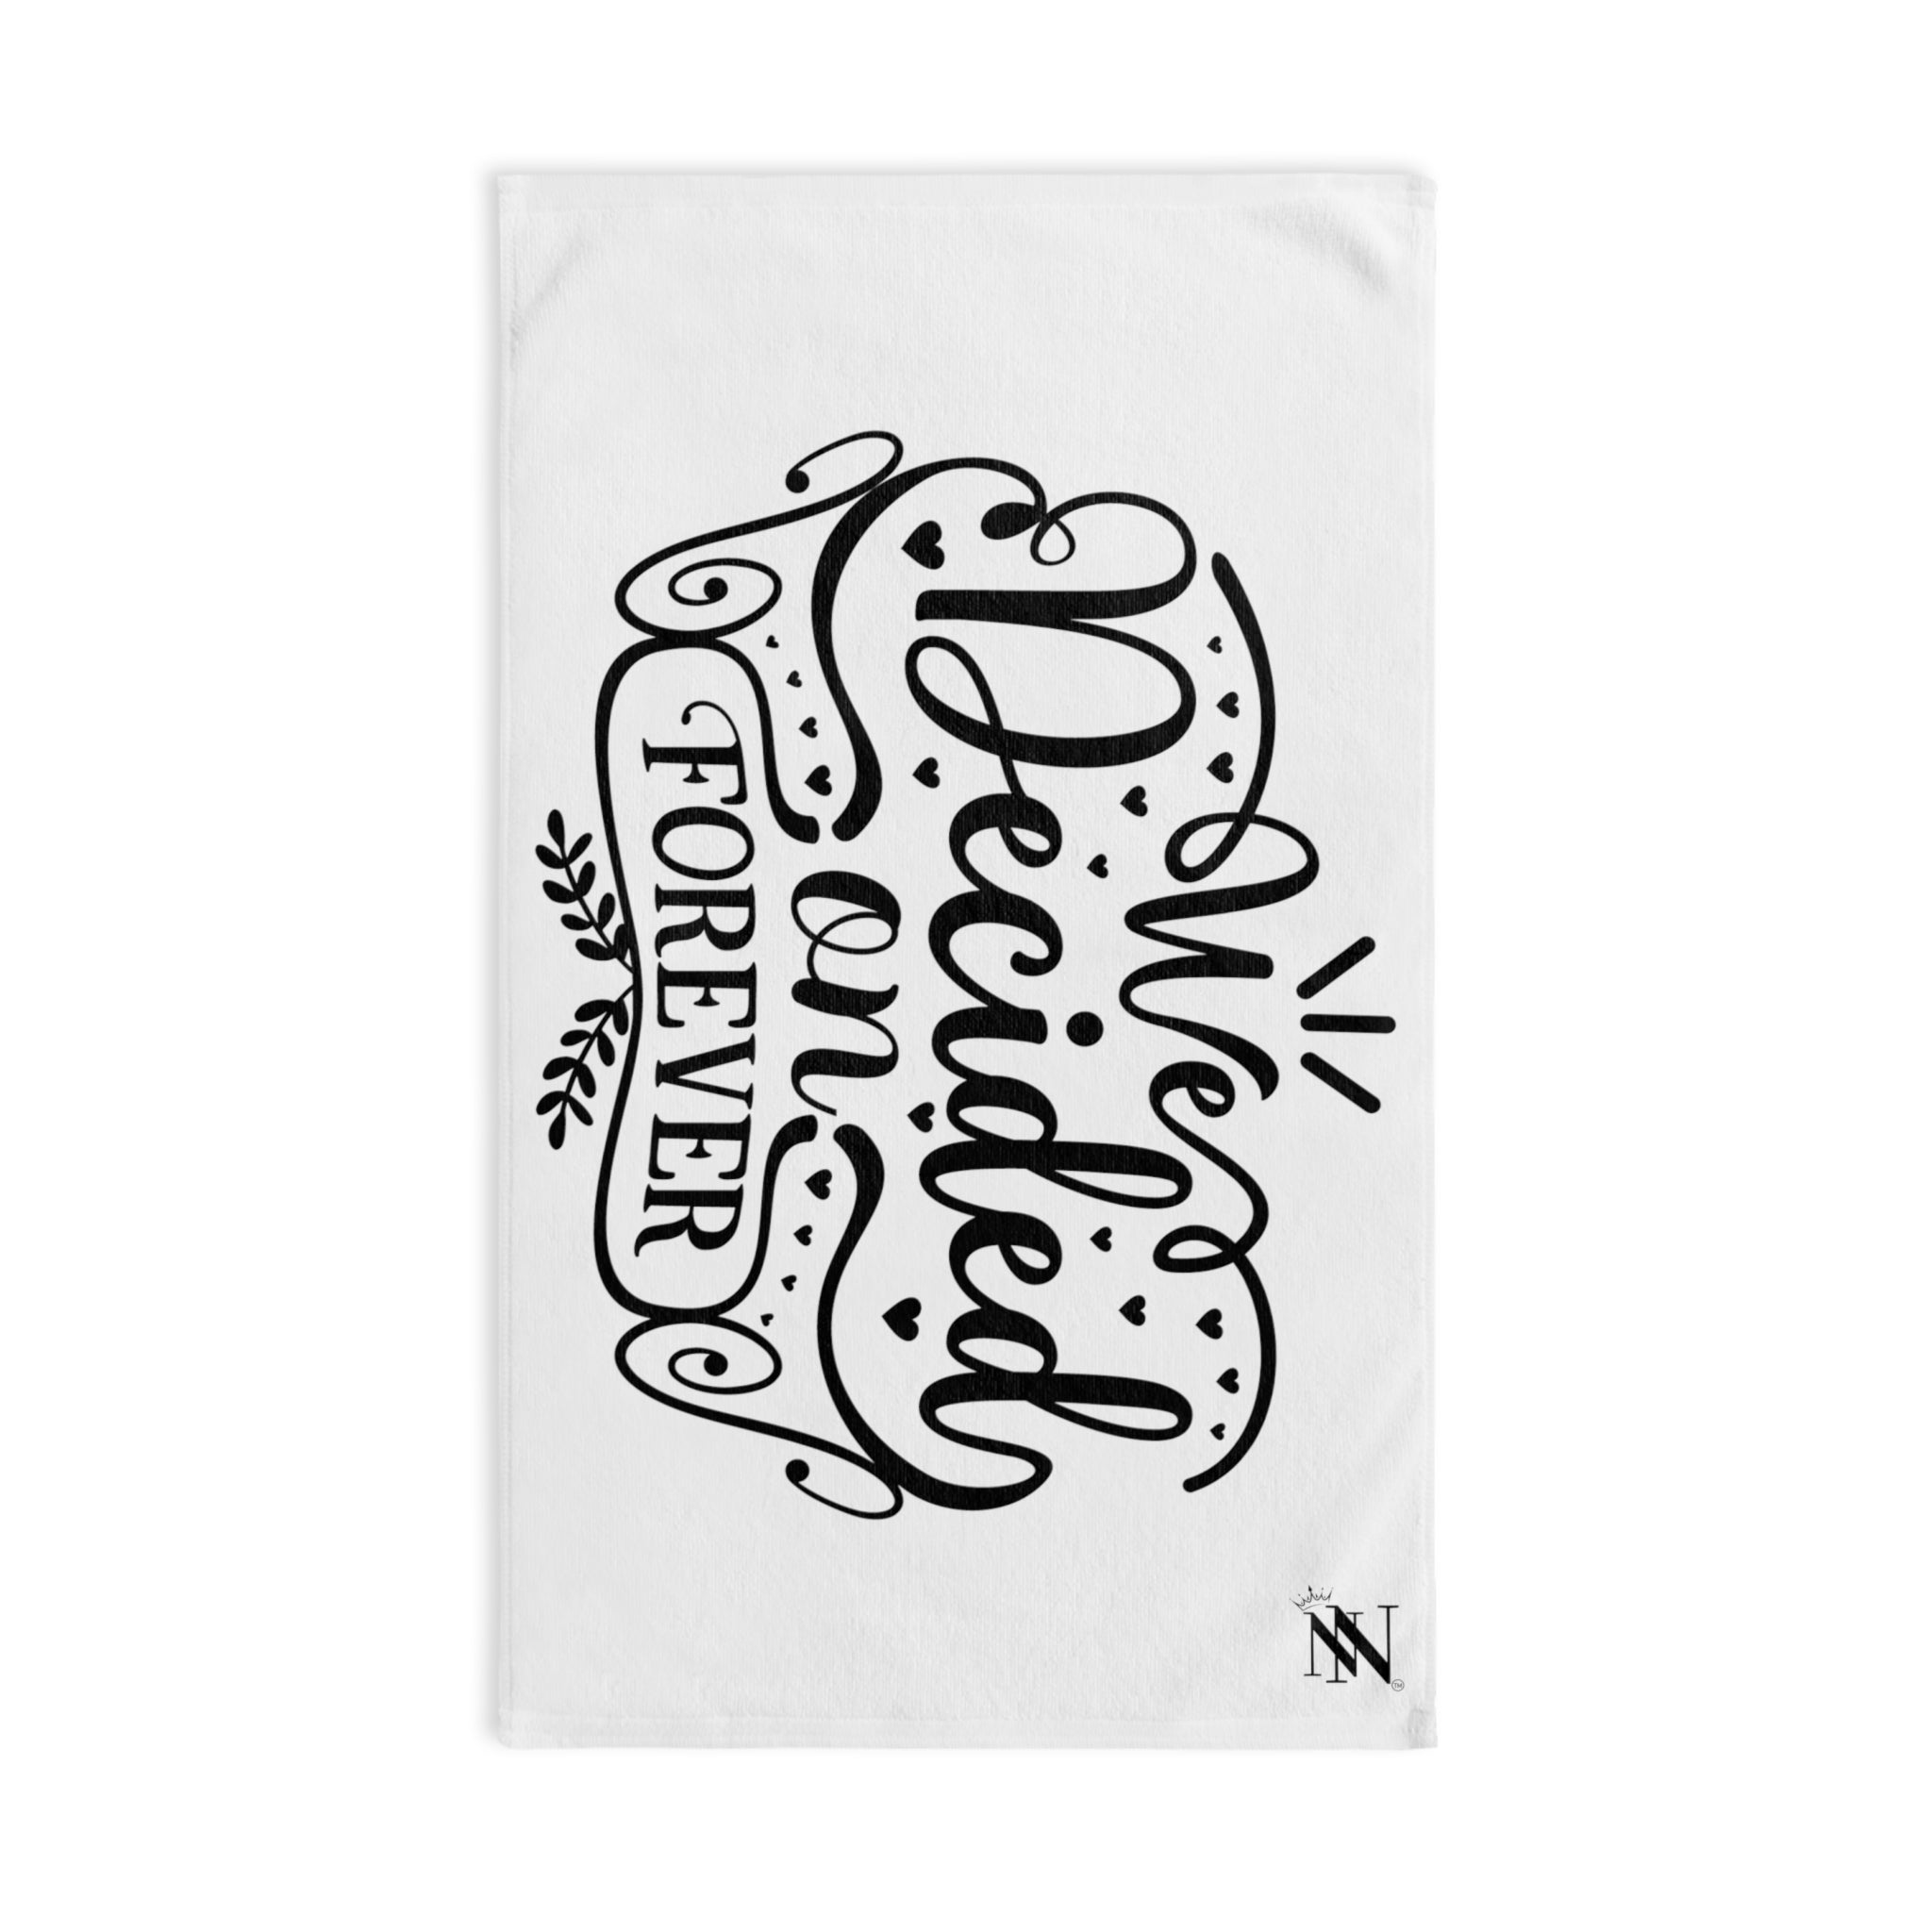 Forever Bride | Nectar Napkins Fun-Flirty Lovers' After Sex Towels NECTAR NAPKINS